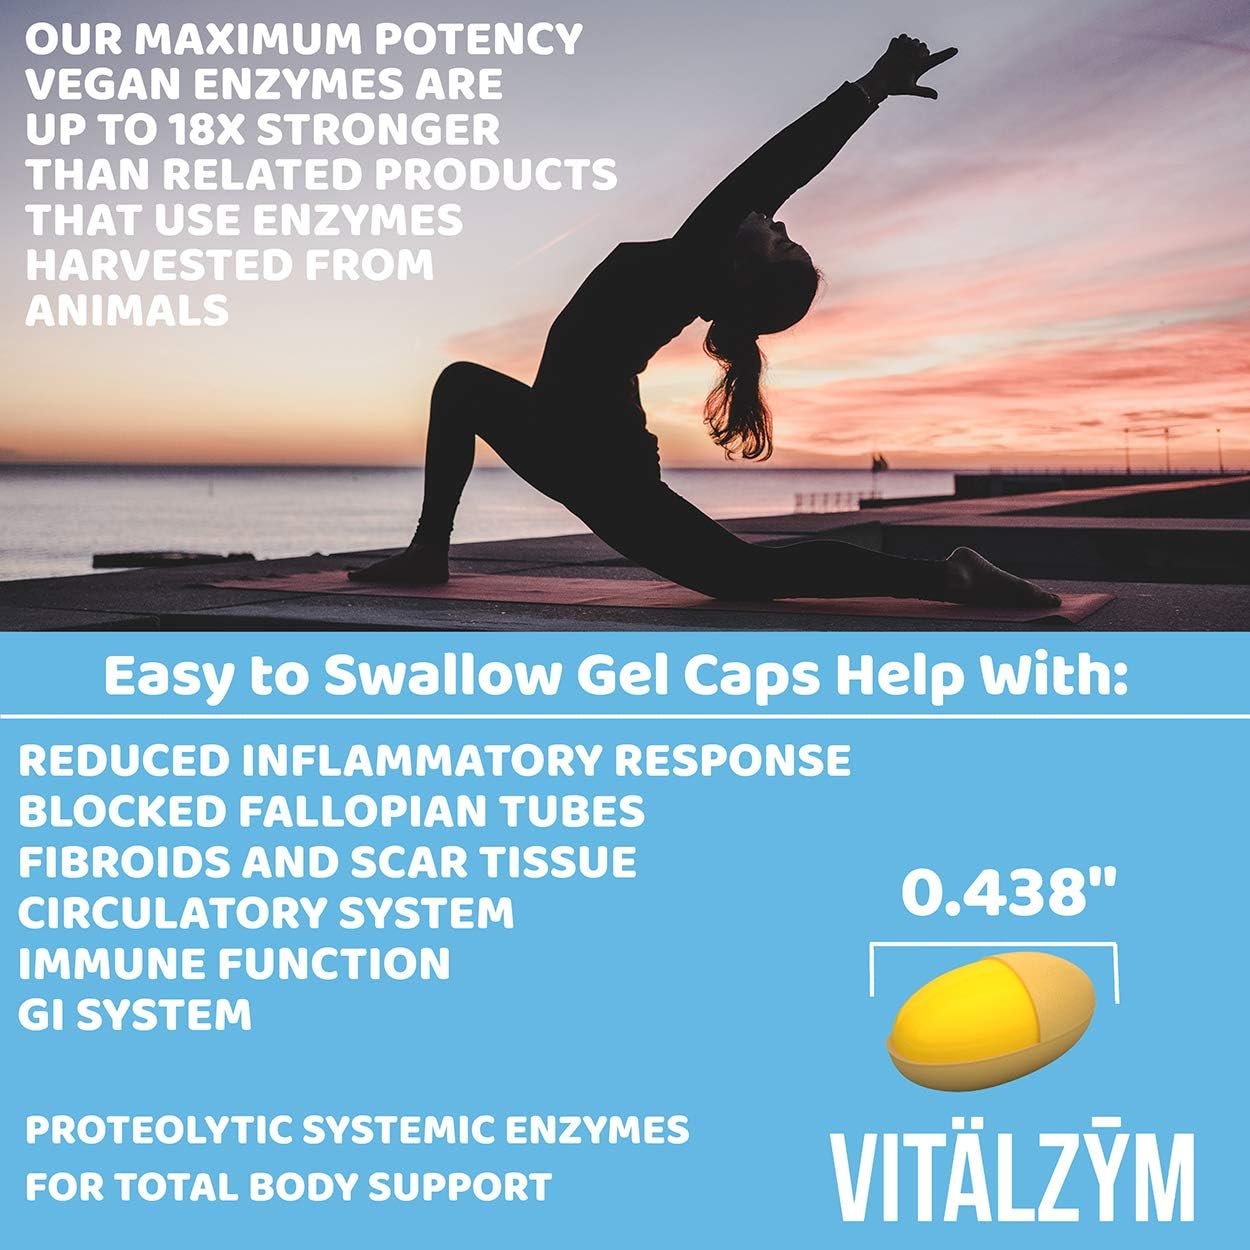 VITÄLZYM Proteolytic Systemic Enzymes Liquid Gel Capsules with Serrapeptase, Immune and Joint Support, Natural Ache Relief Plus Fertility Supplement (60 Capsules)